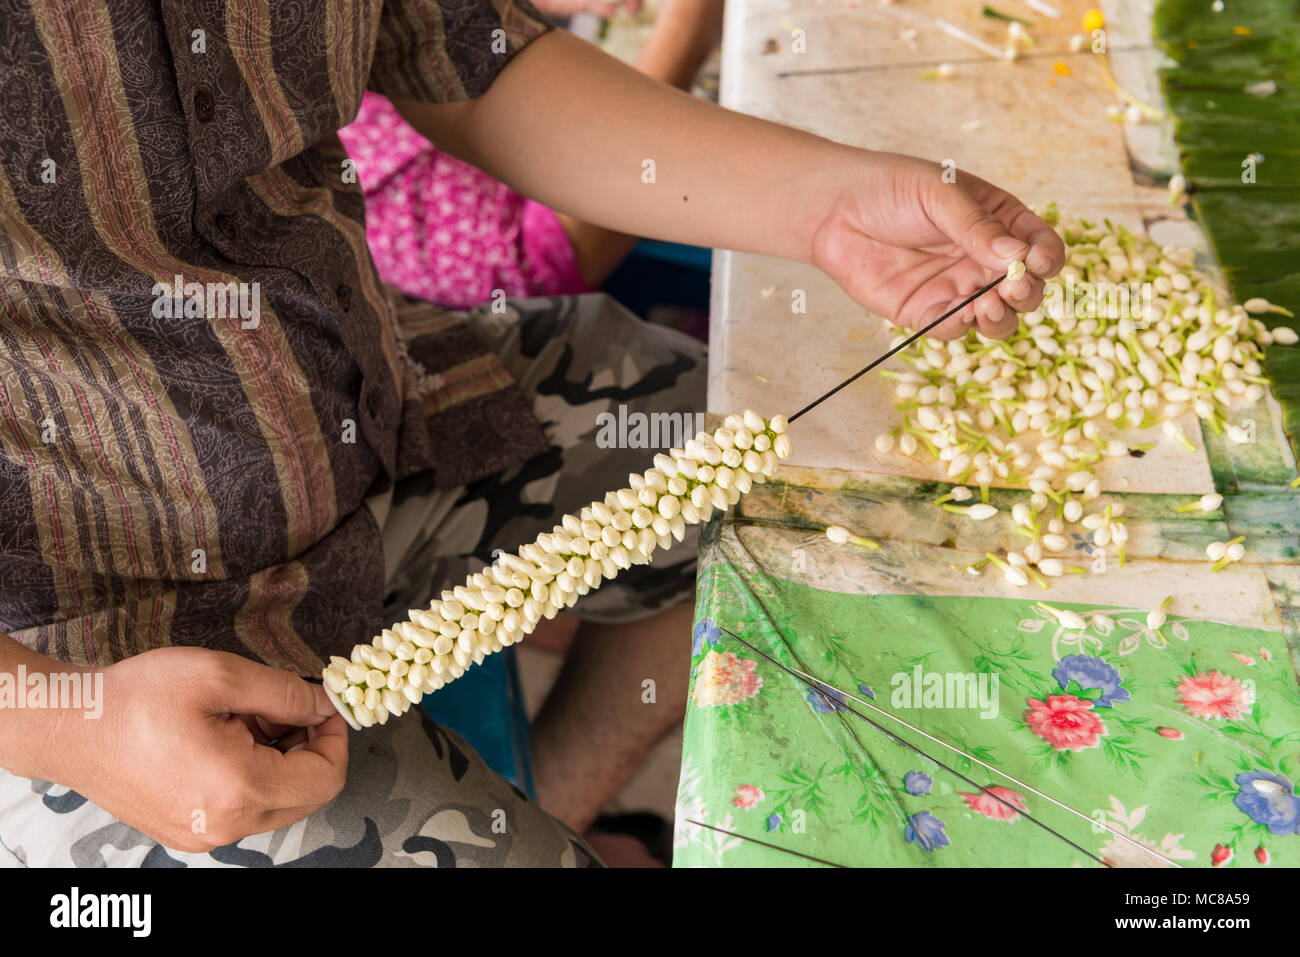 A man threads flower s on to a metal needle to make a decorative flower arrangement in the flower market Bankok Thailand Stock Photo